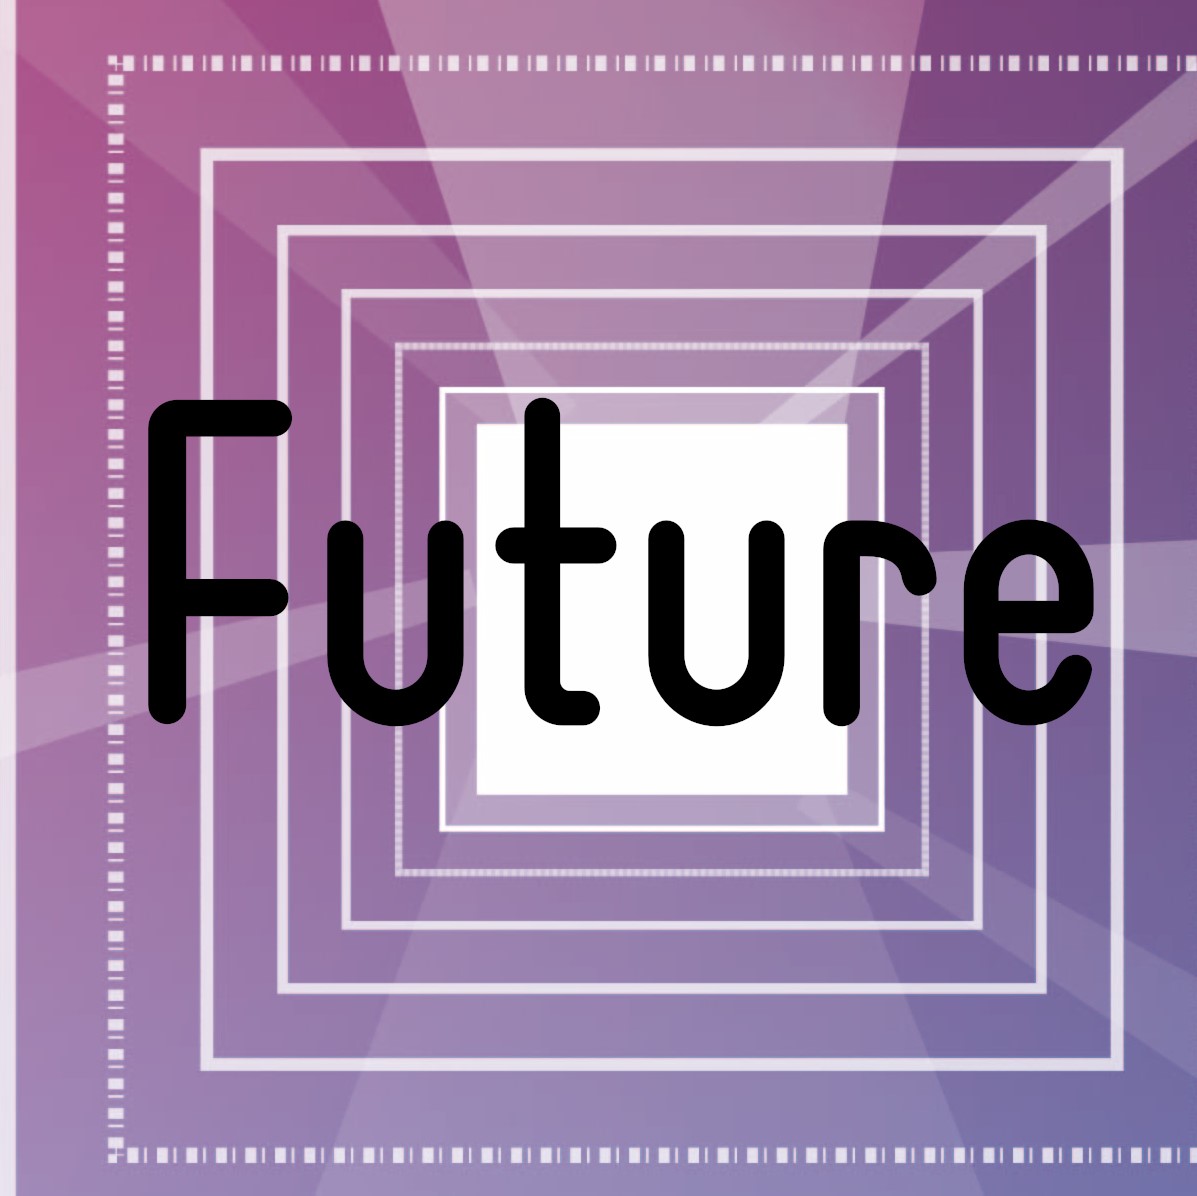 Go to 'Future world' page